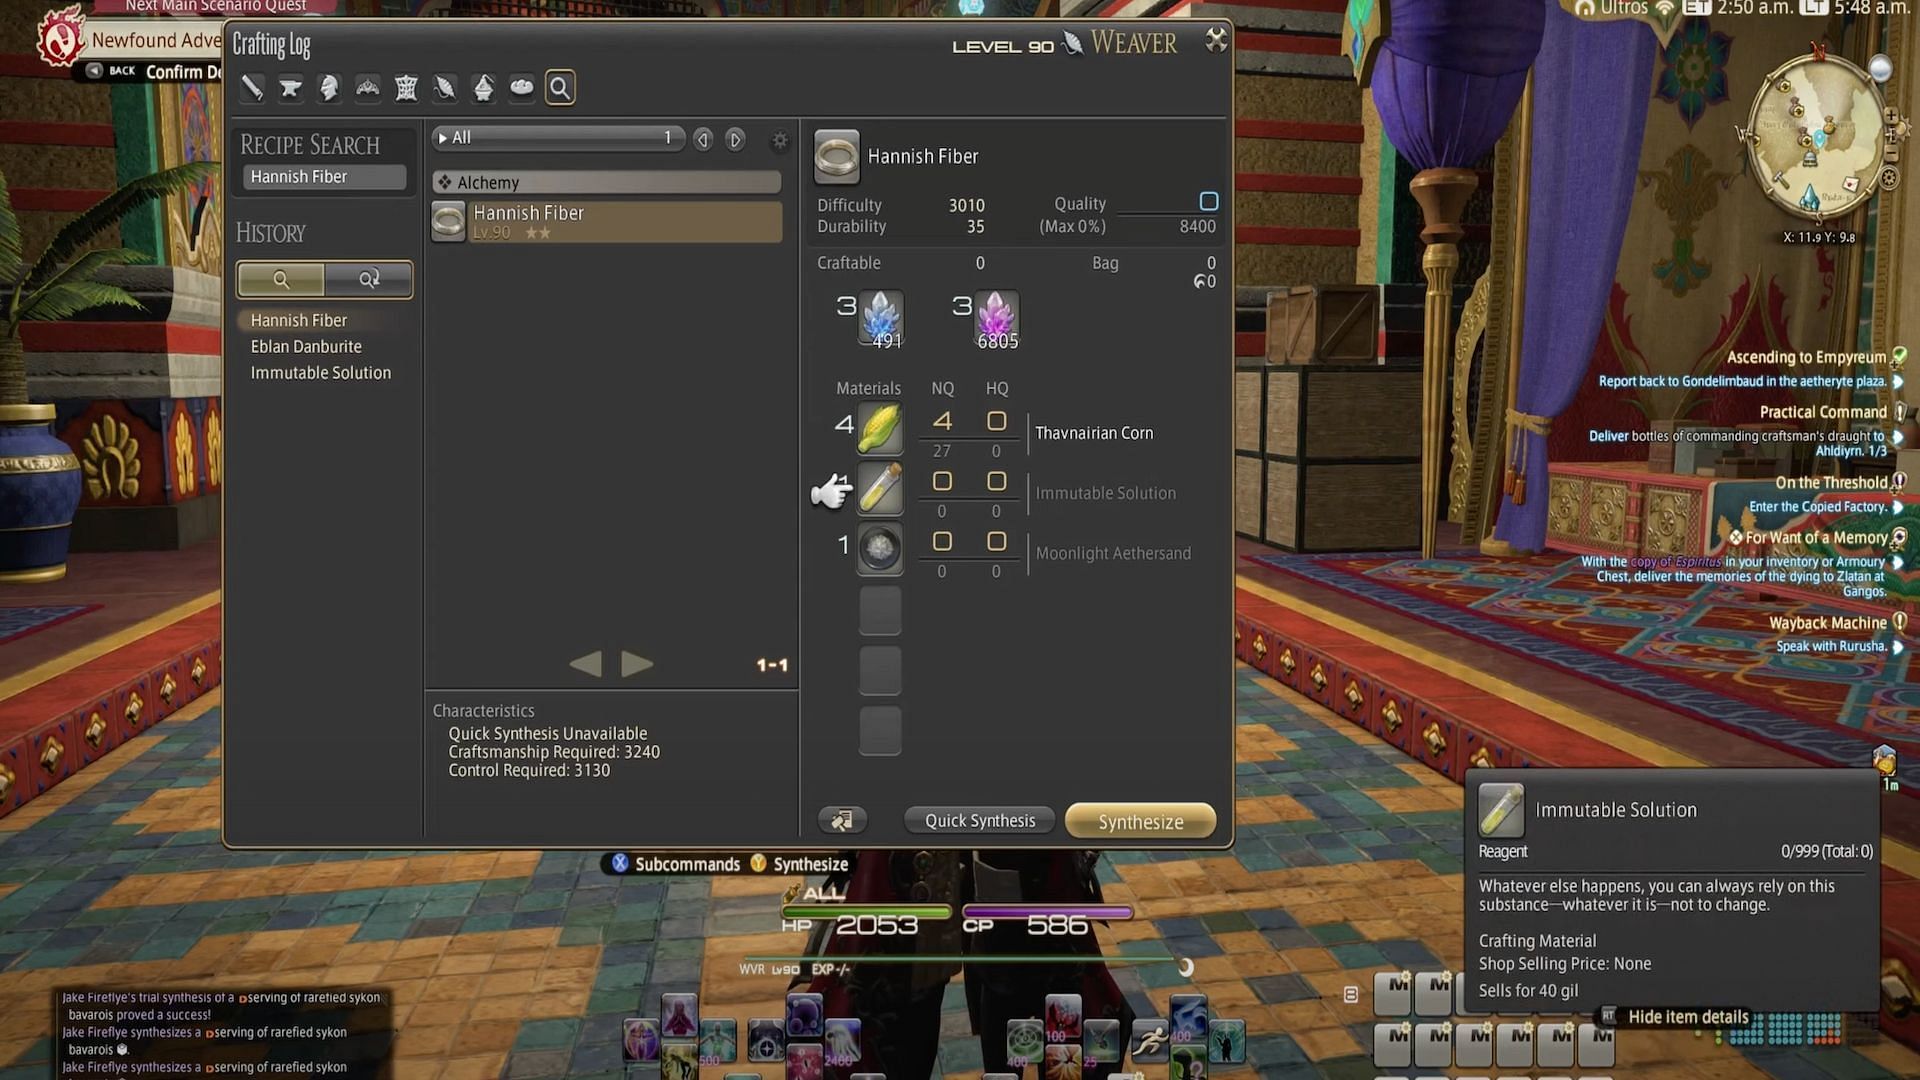 Players are able to trade Purple Crafter Scrip in order to obtain Immutable Solution in game (Image via Artysan FFXIV/YouTube)